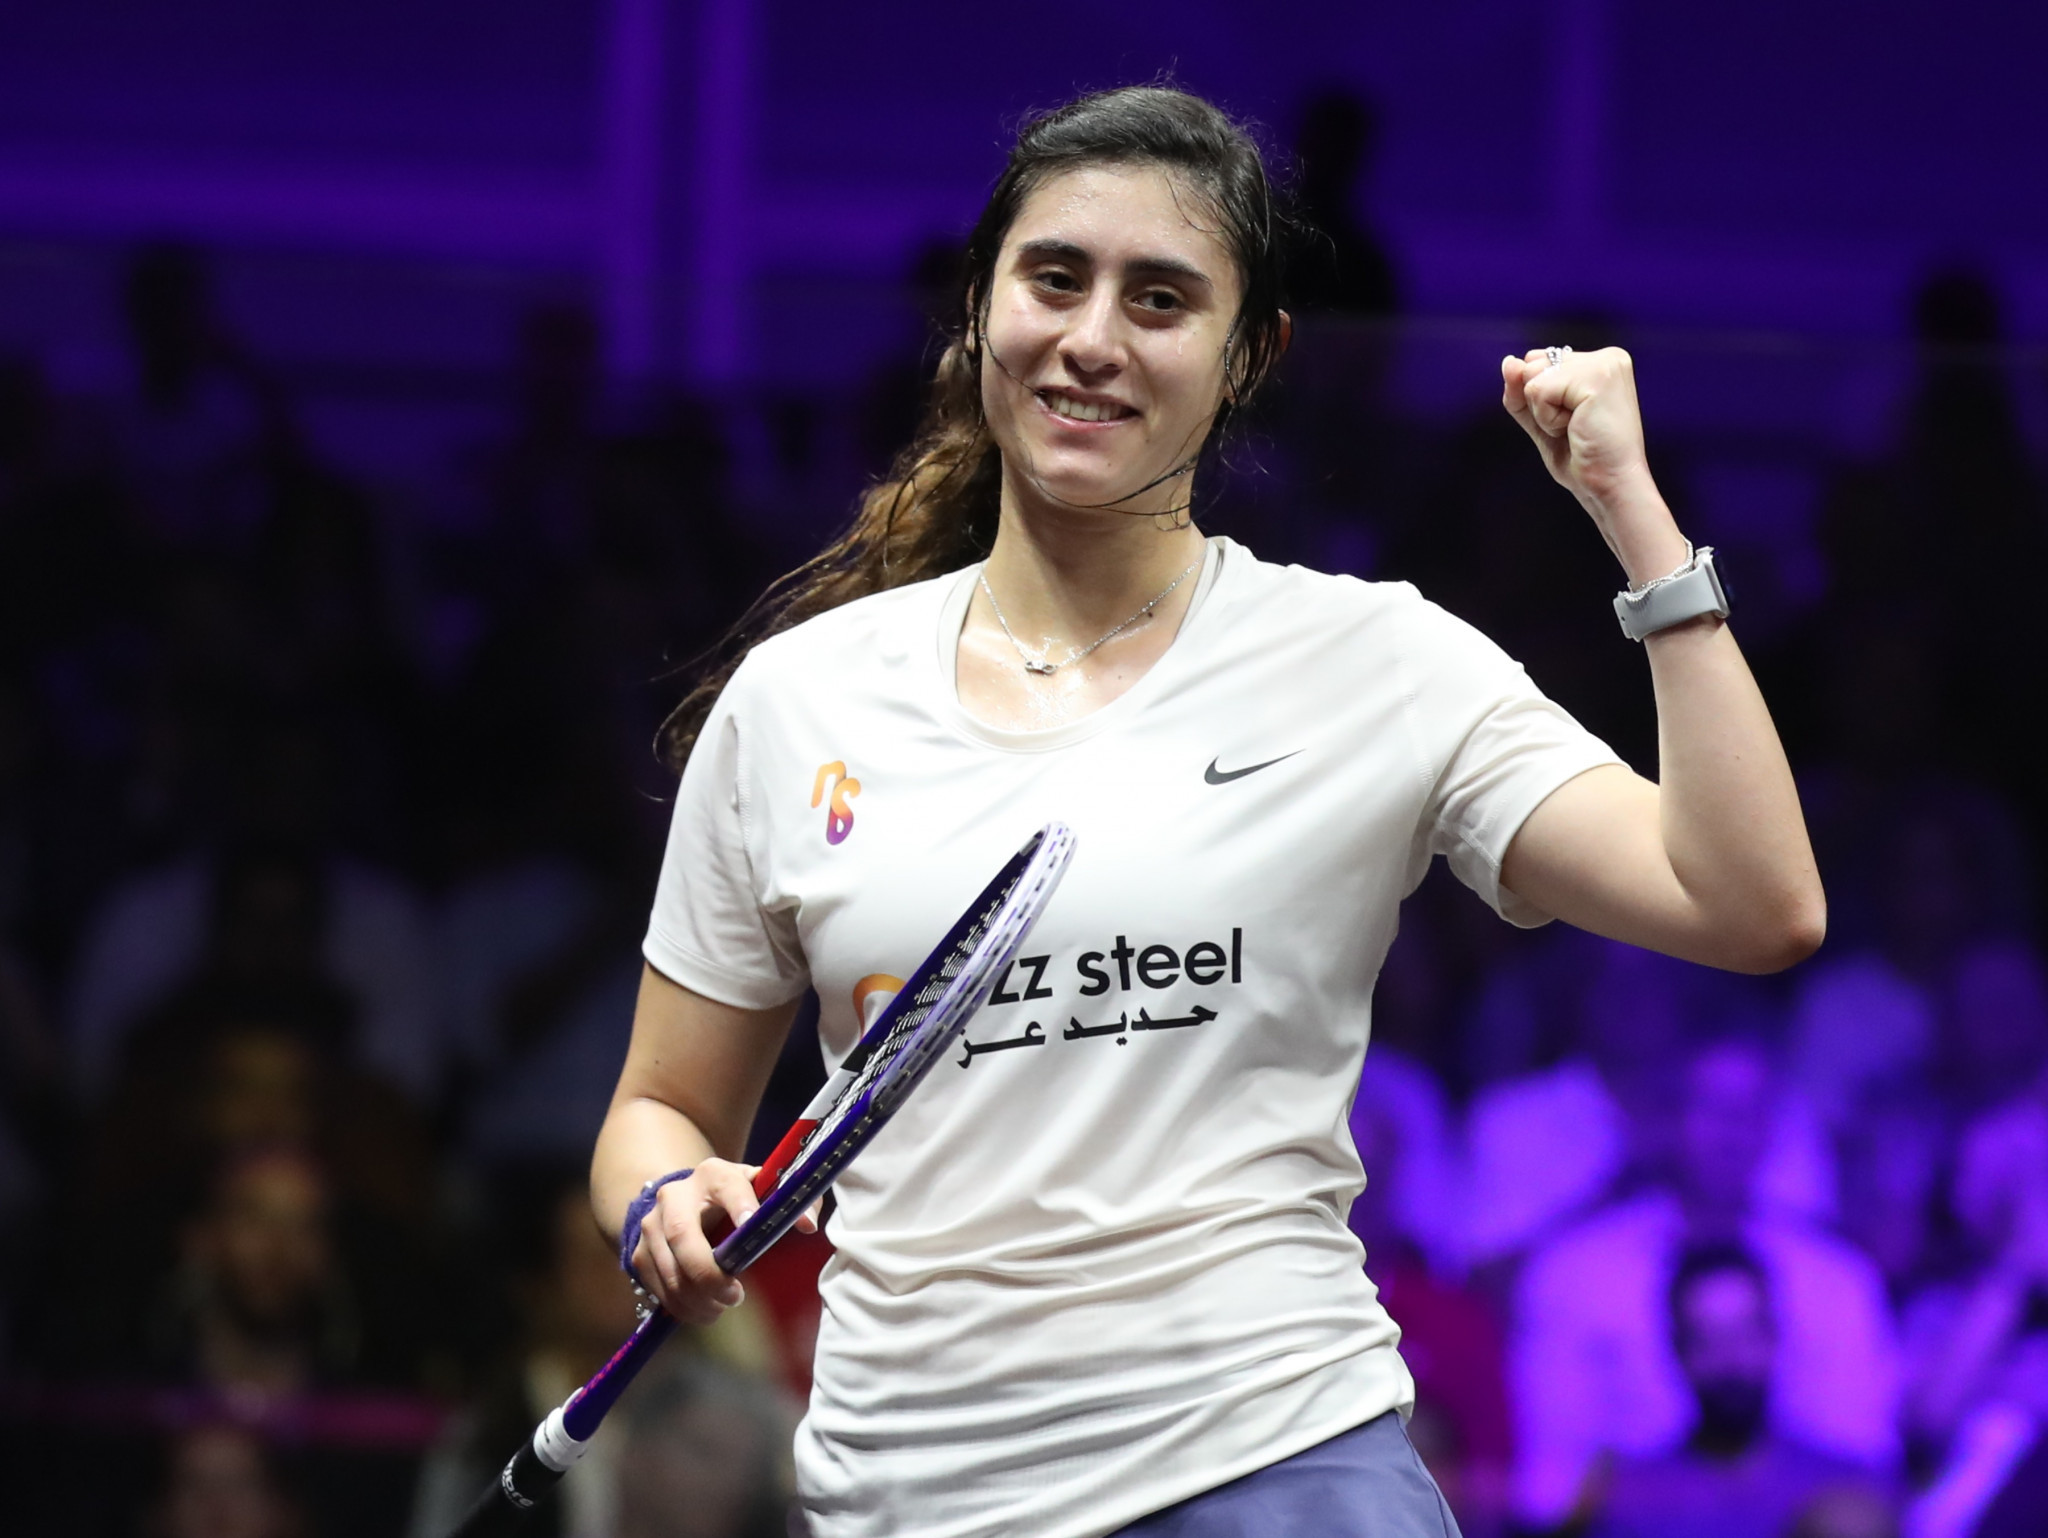 Nour El Sherbini has already qualified for the PSA World Tour Finals in June ©Getty Images